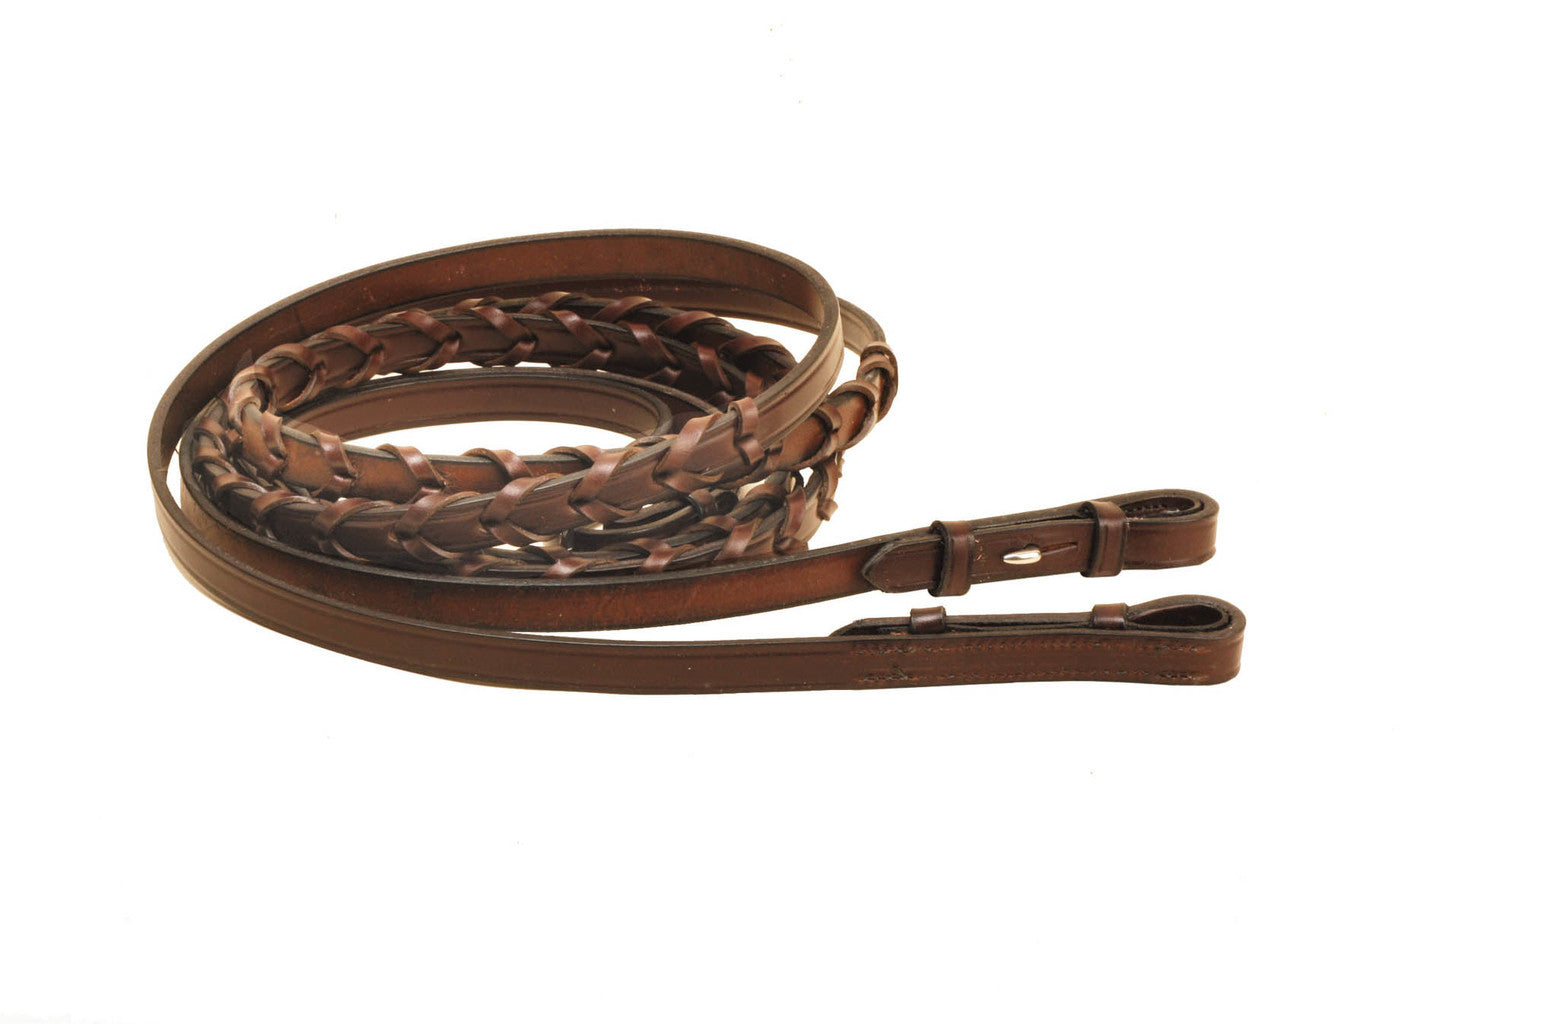 Tory Leather 5/8 Wide Laced Reins With Stud Hook Bit Ends And Stainless Steel Center Buckles- 48", Black_1